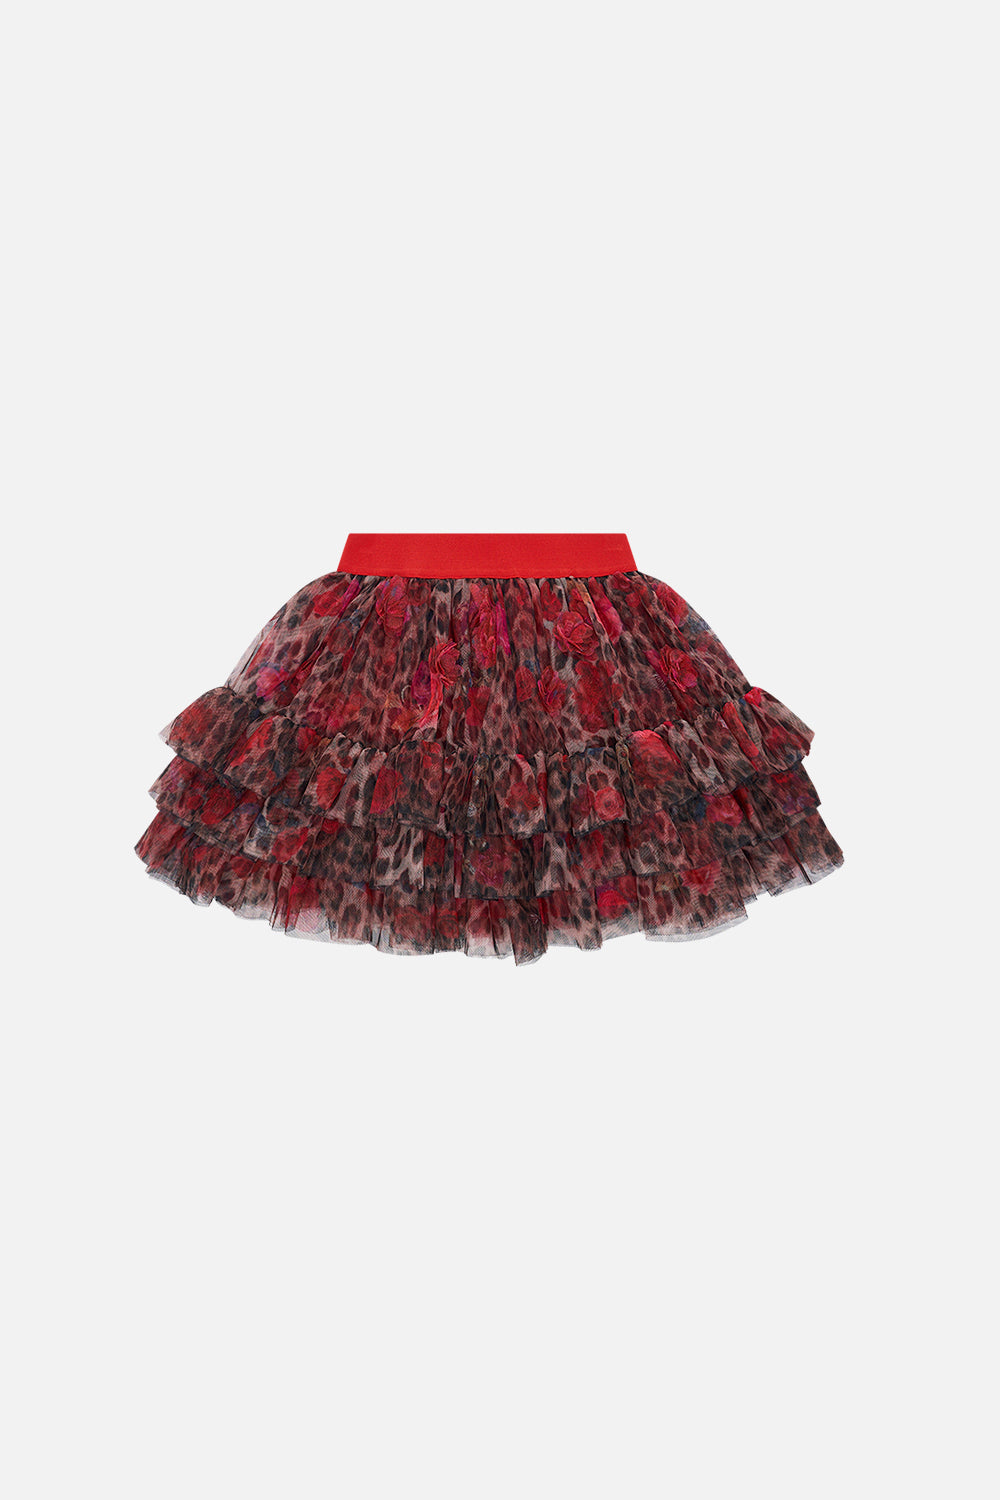 Product view of Milla By CAMILLA kids tutu skirt in Heart Like A Wildflower print 